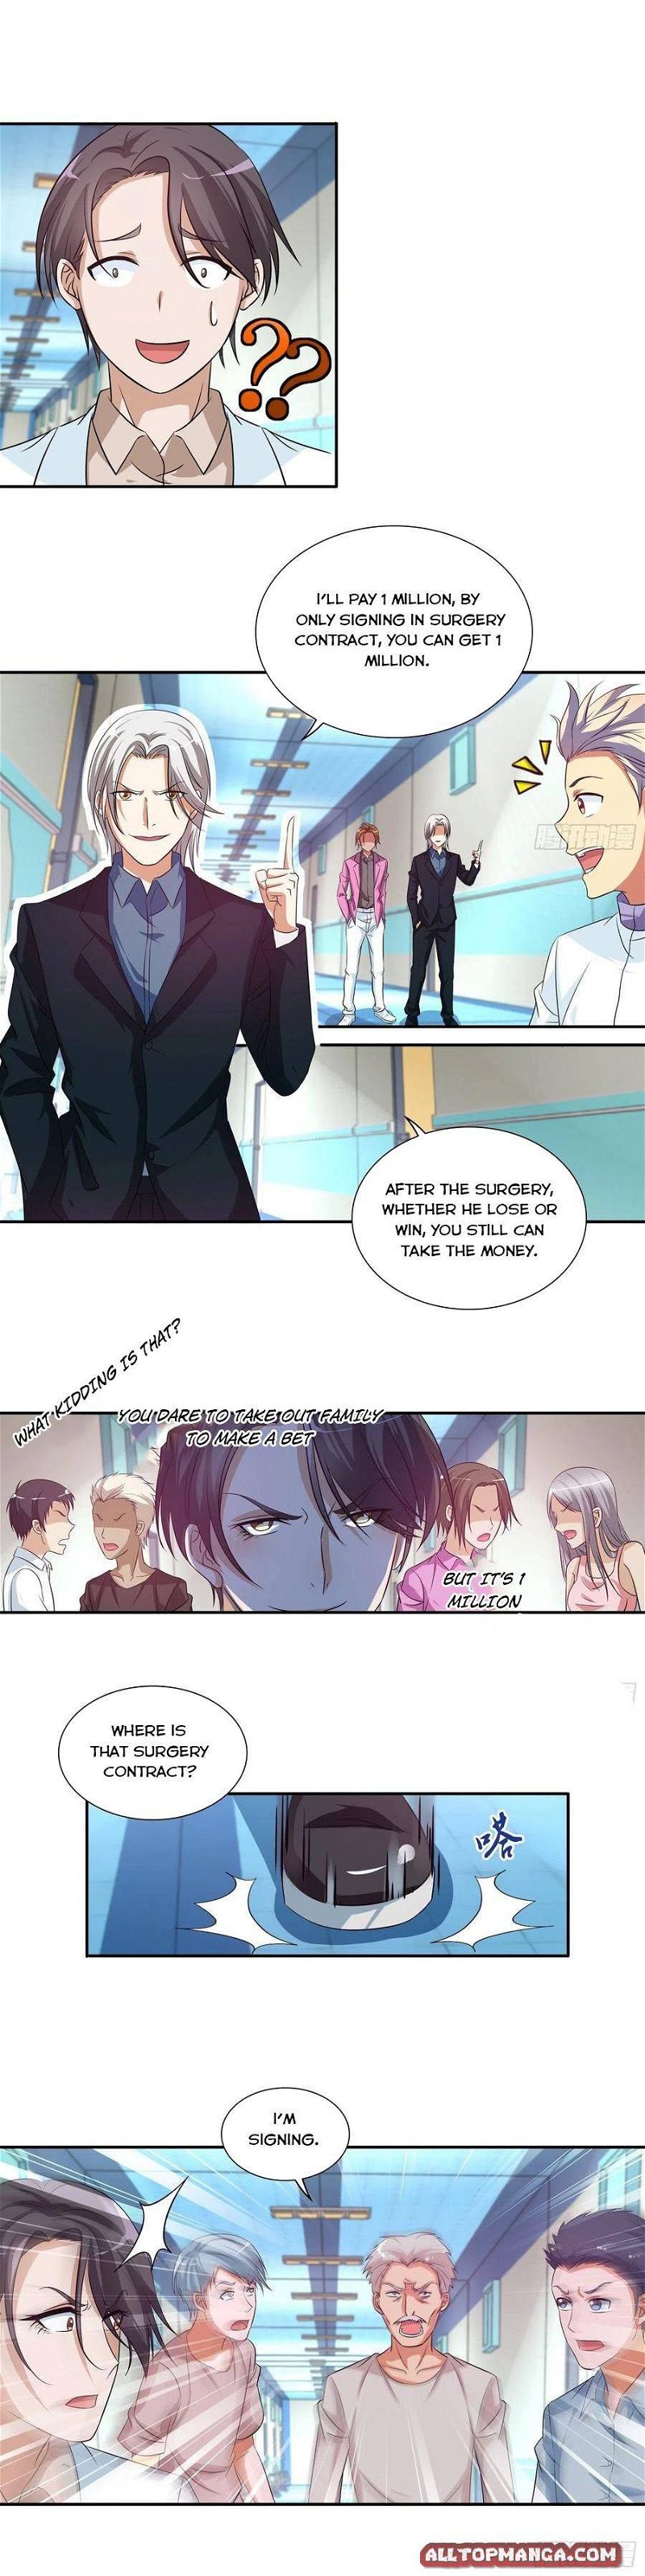 I Am A God Of Medicine Chapter 108 page 2